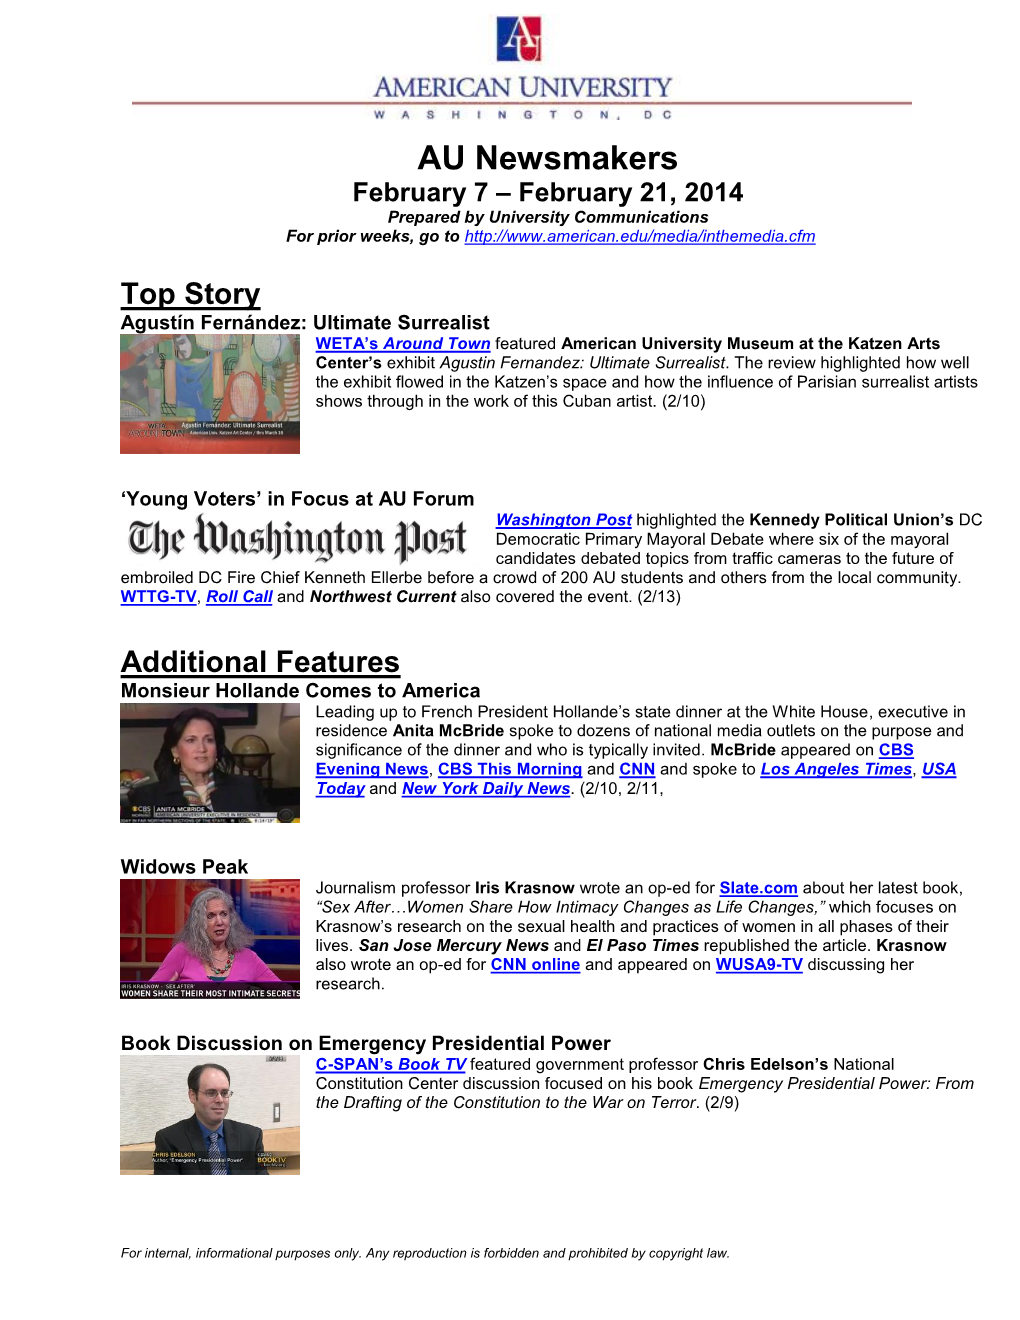 AU Newsmakers February 7 – February 21, 2014 Prepared by University Communications for Prior Weeks, Go To